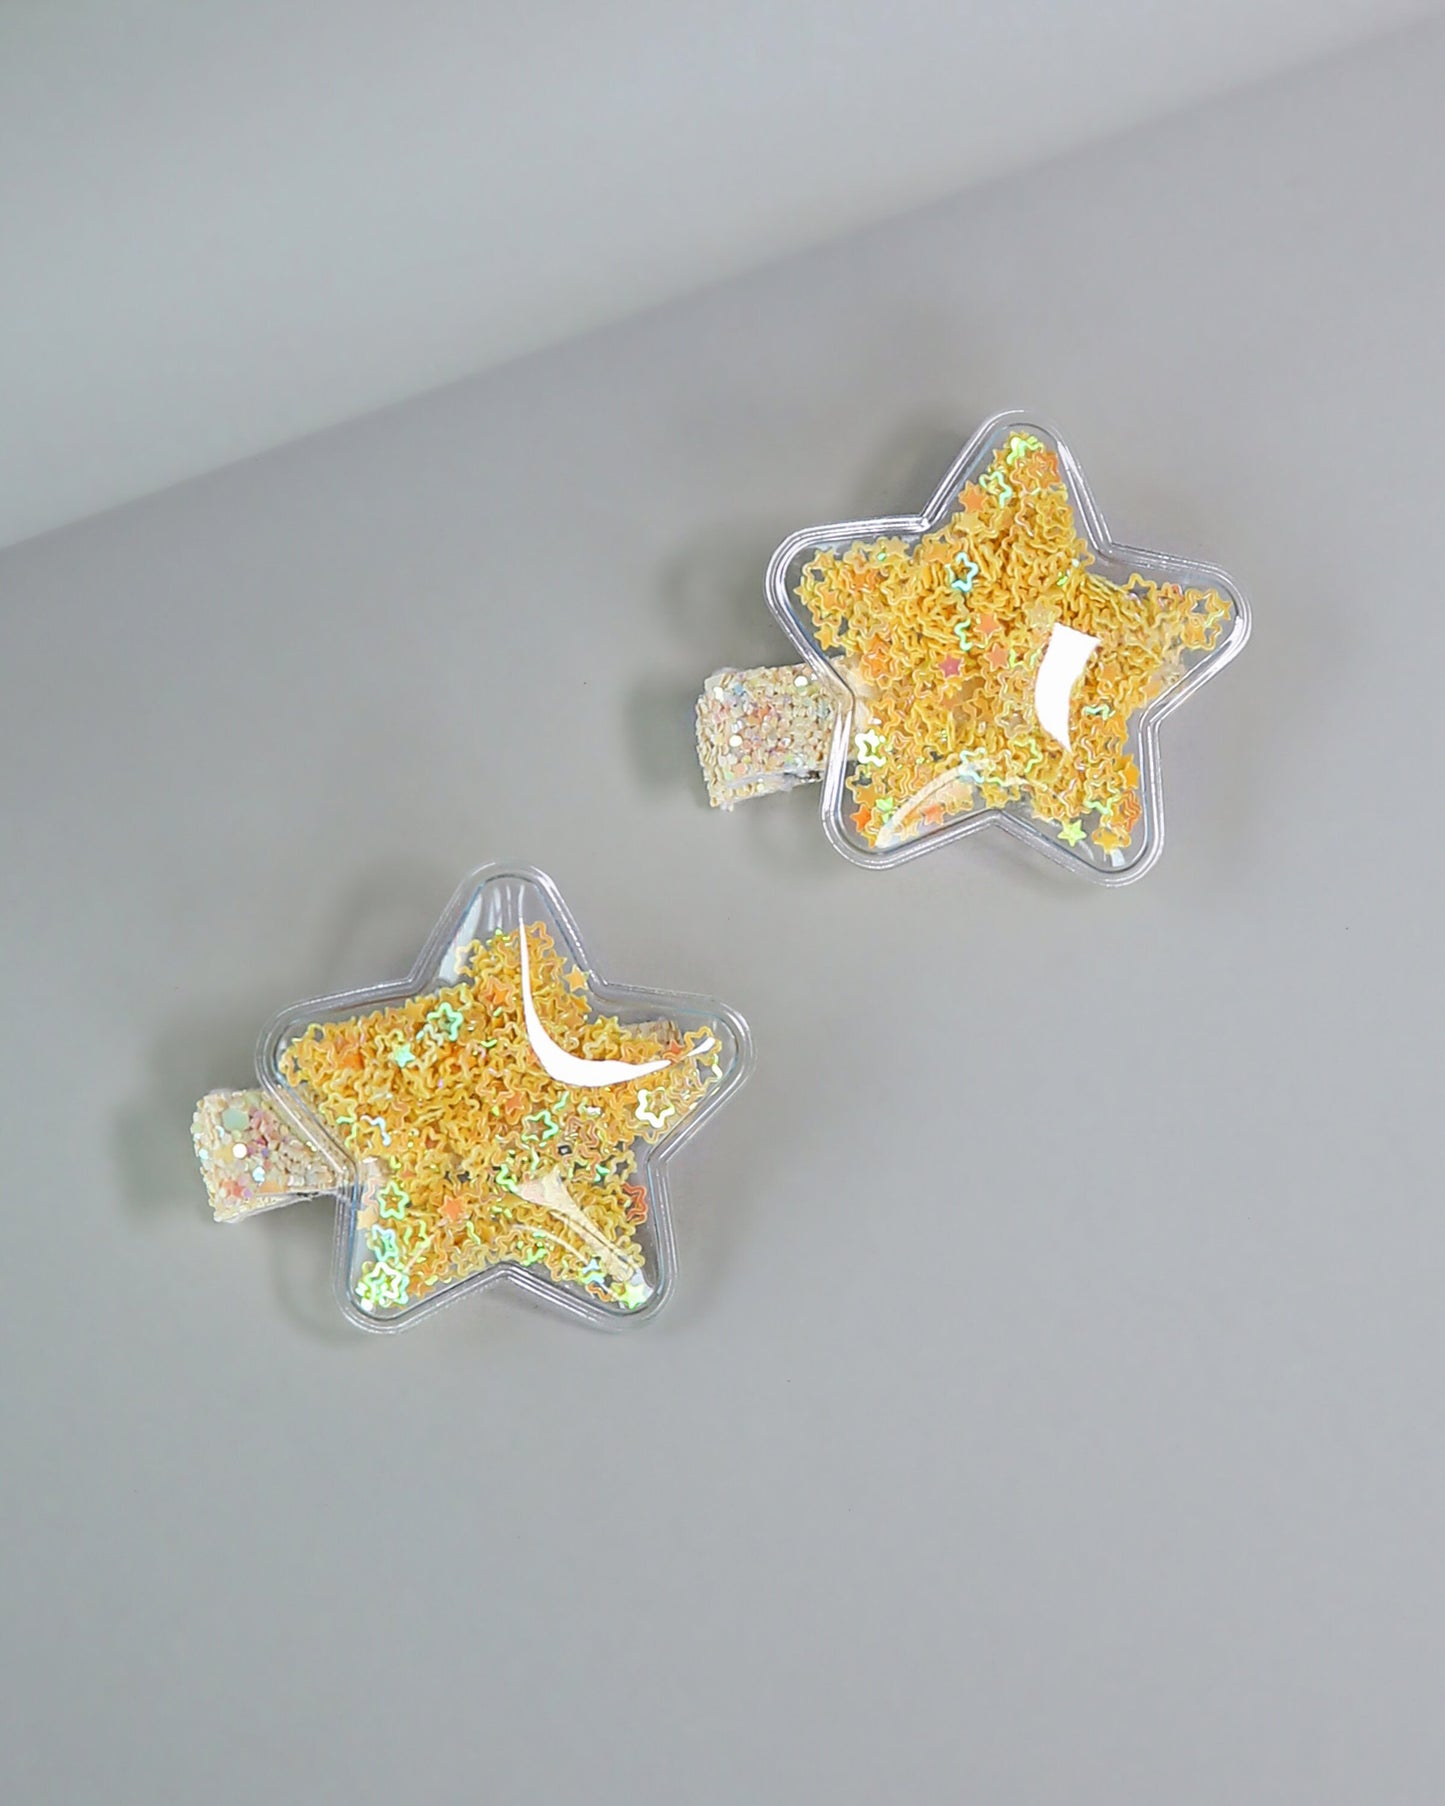 Yellow Star Confetti Shaker Hair Clip Pair - Sequin Hair Clips -  Confetti Hair Clips - Clear Shaker Hair Clips - Pigtail Clips